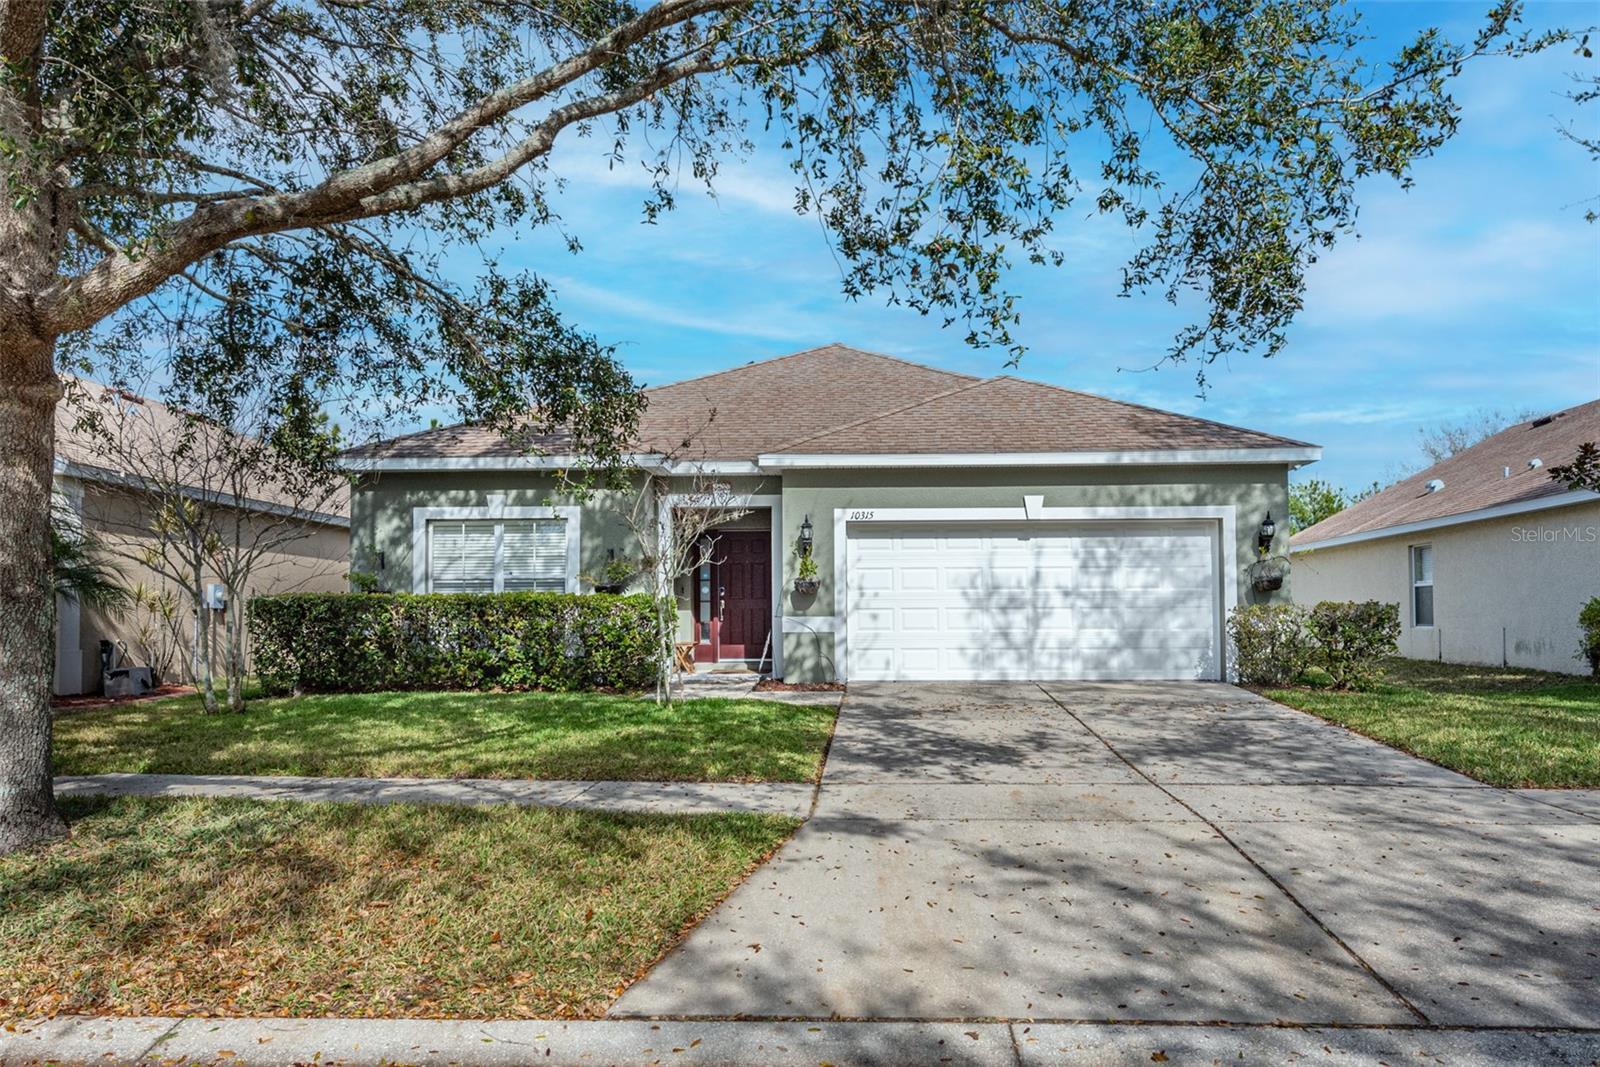 Photo one of 10315 Celtic Ash Dr Ruskin FL 33573 | MLS T3505276